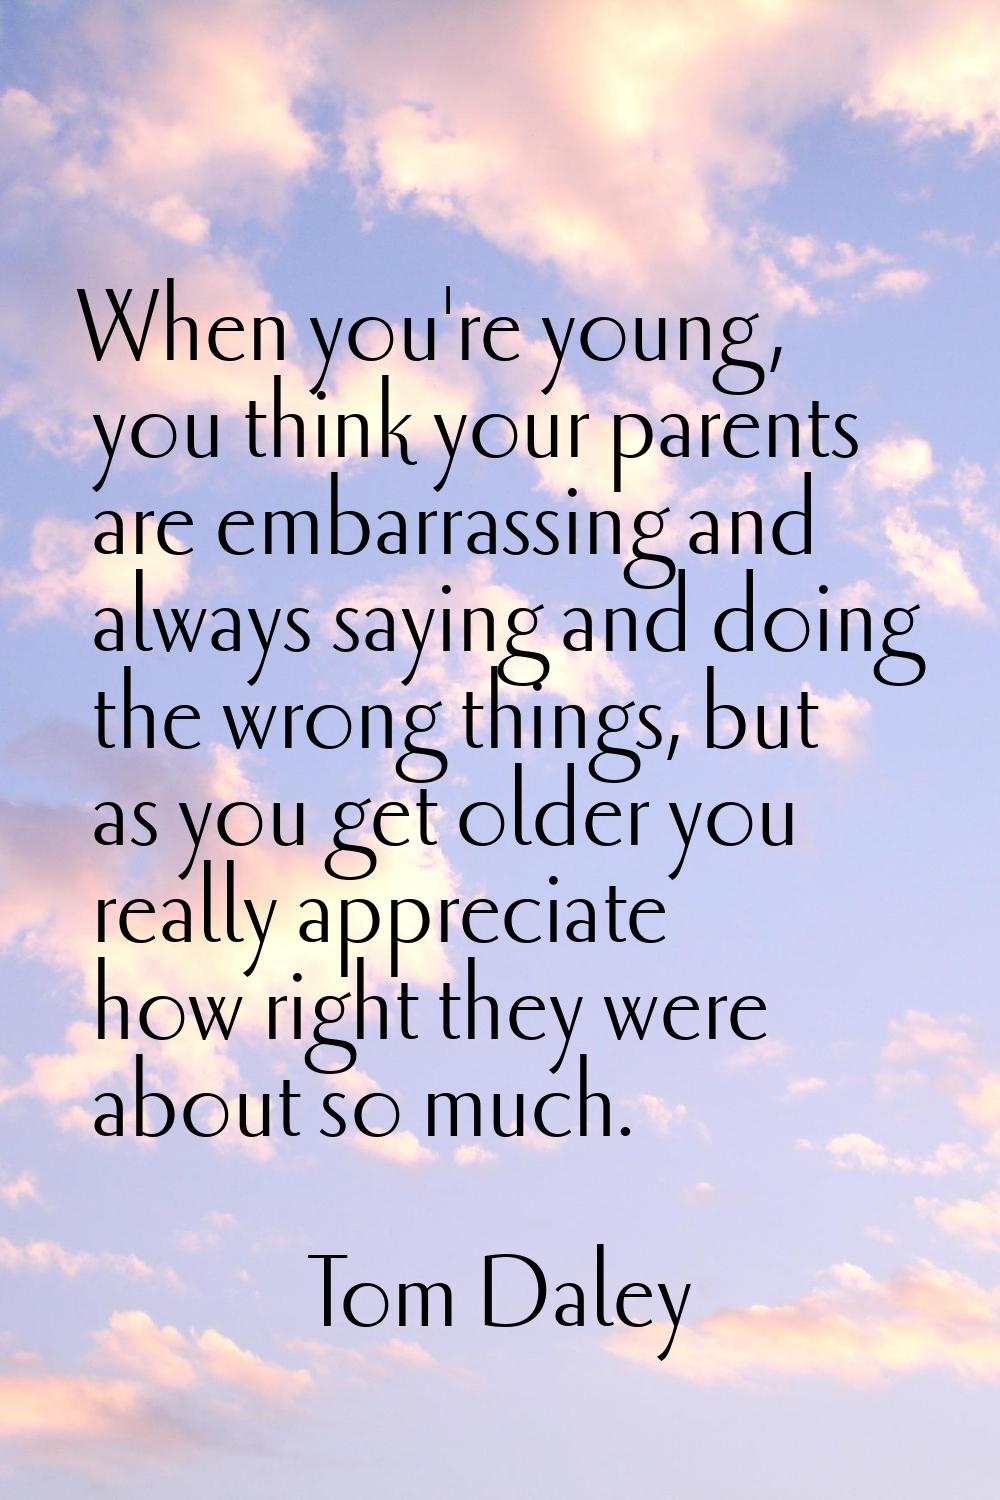 When you're young, you think your parents are embarrassing and always saying and doing the wrong th